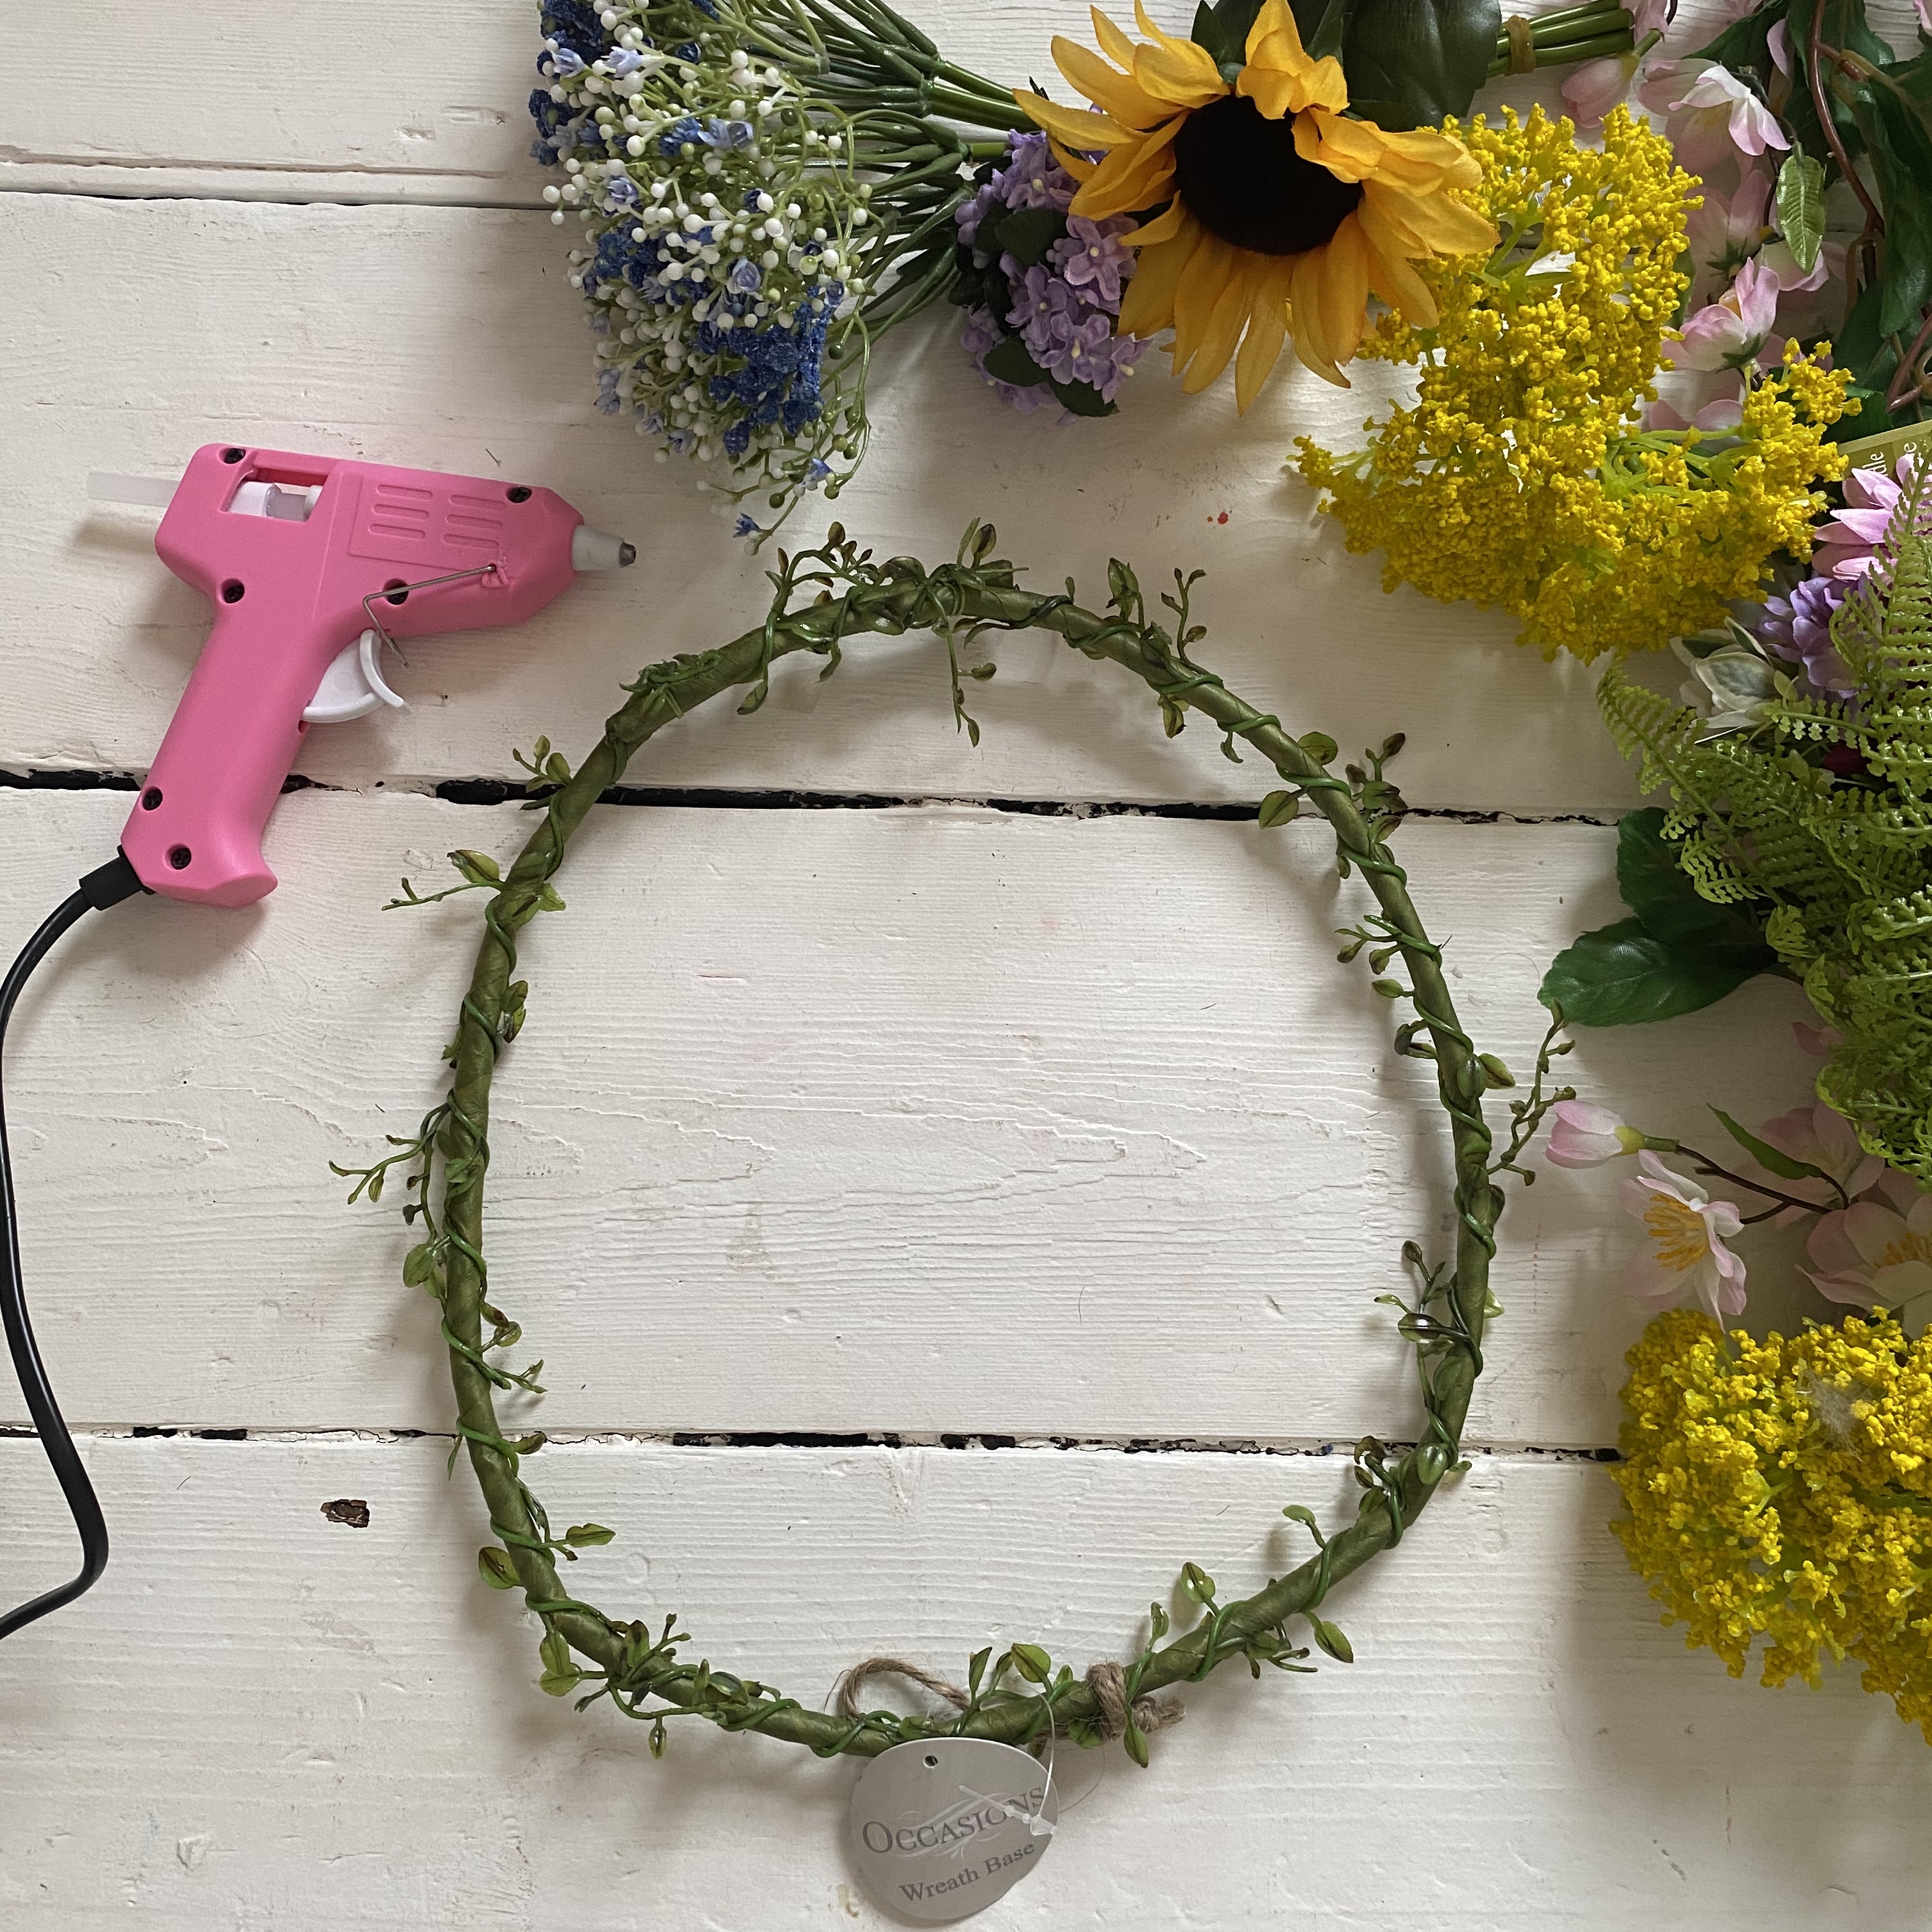 How to make a flower crown with fake flowers step 1